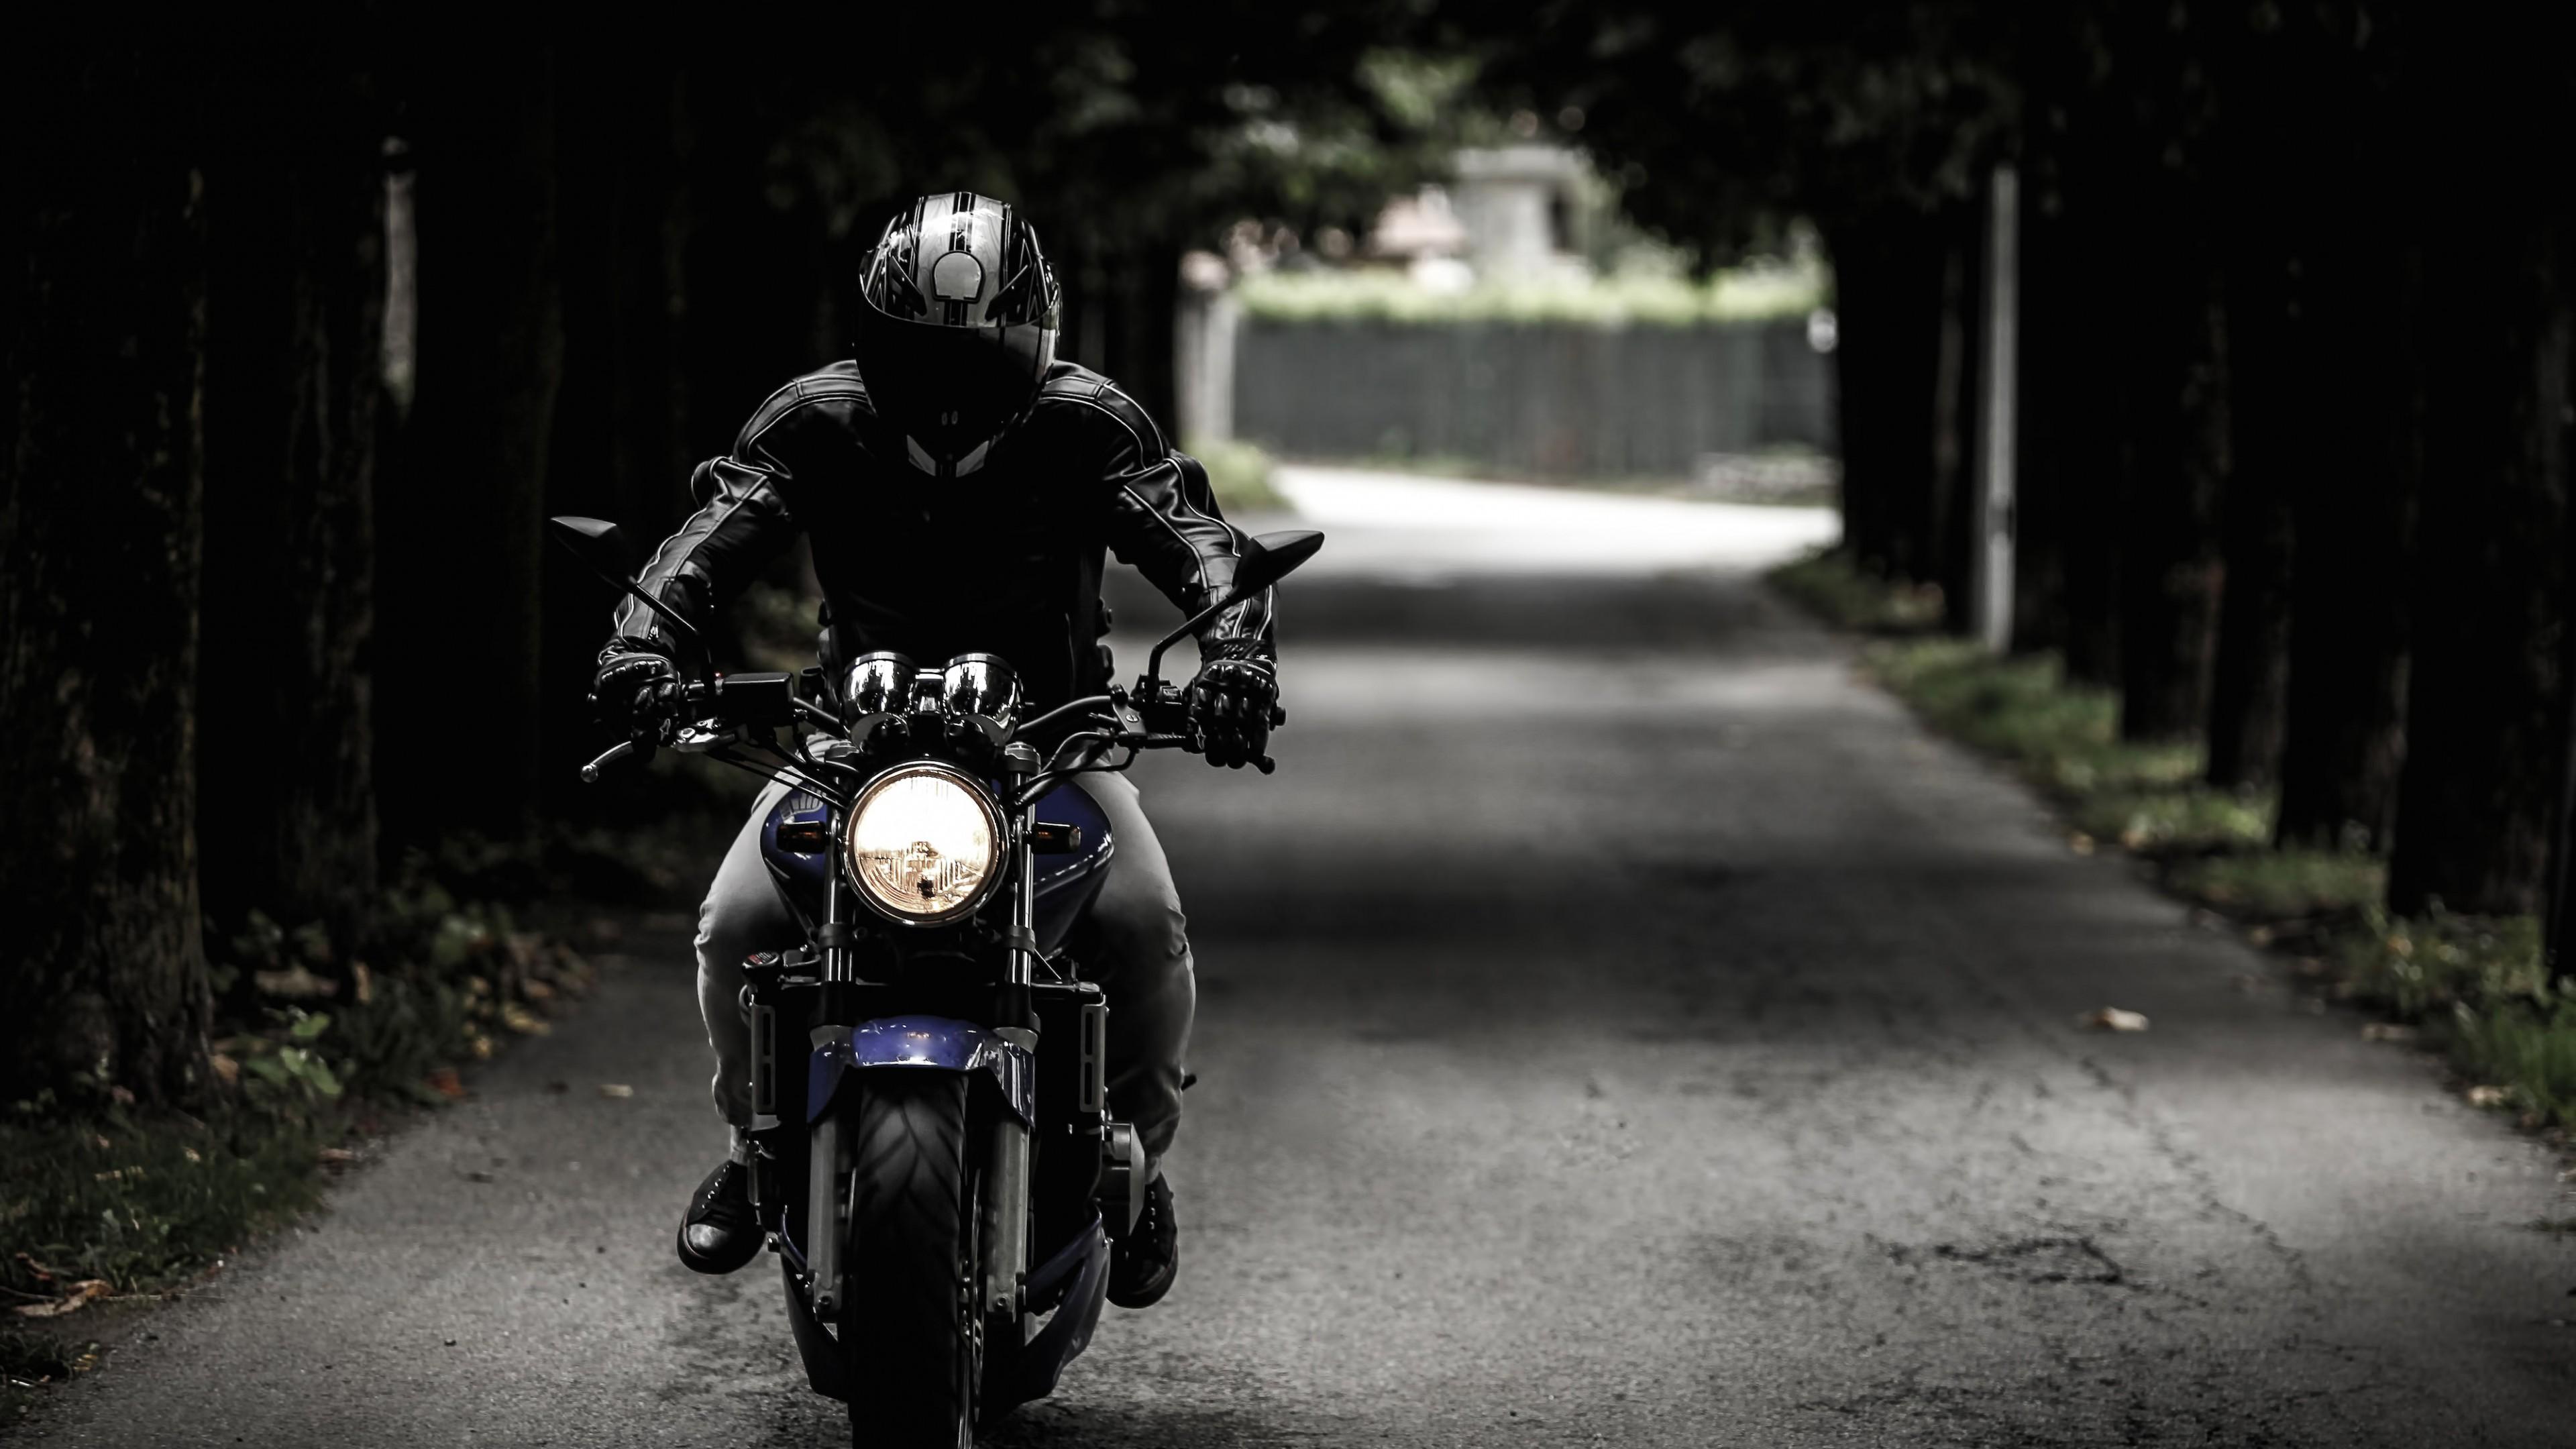 Bike 4K wallpaper for your desktop or mobile screen free and easy to download